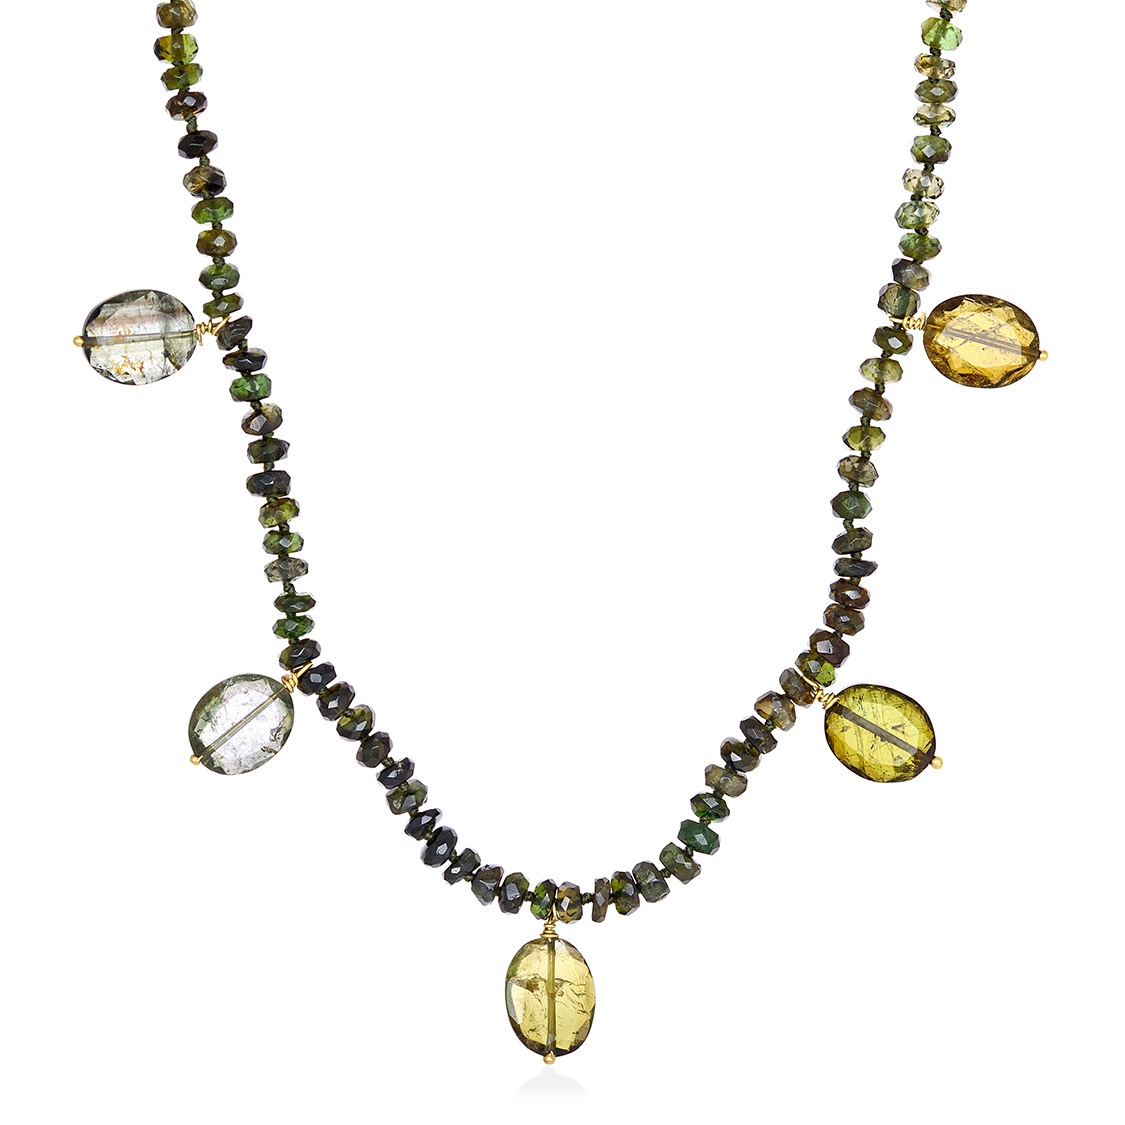 Necklace with green tourmalines